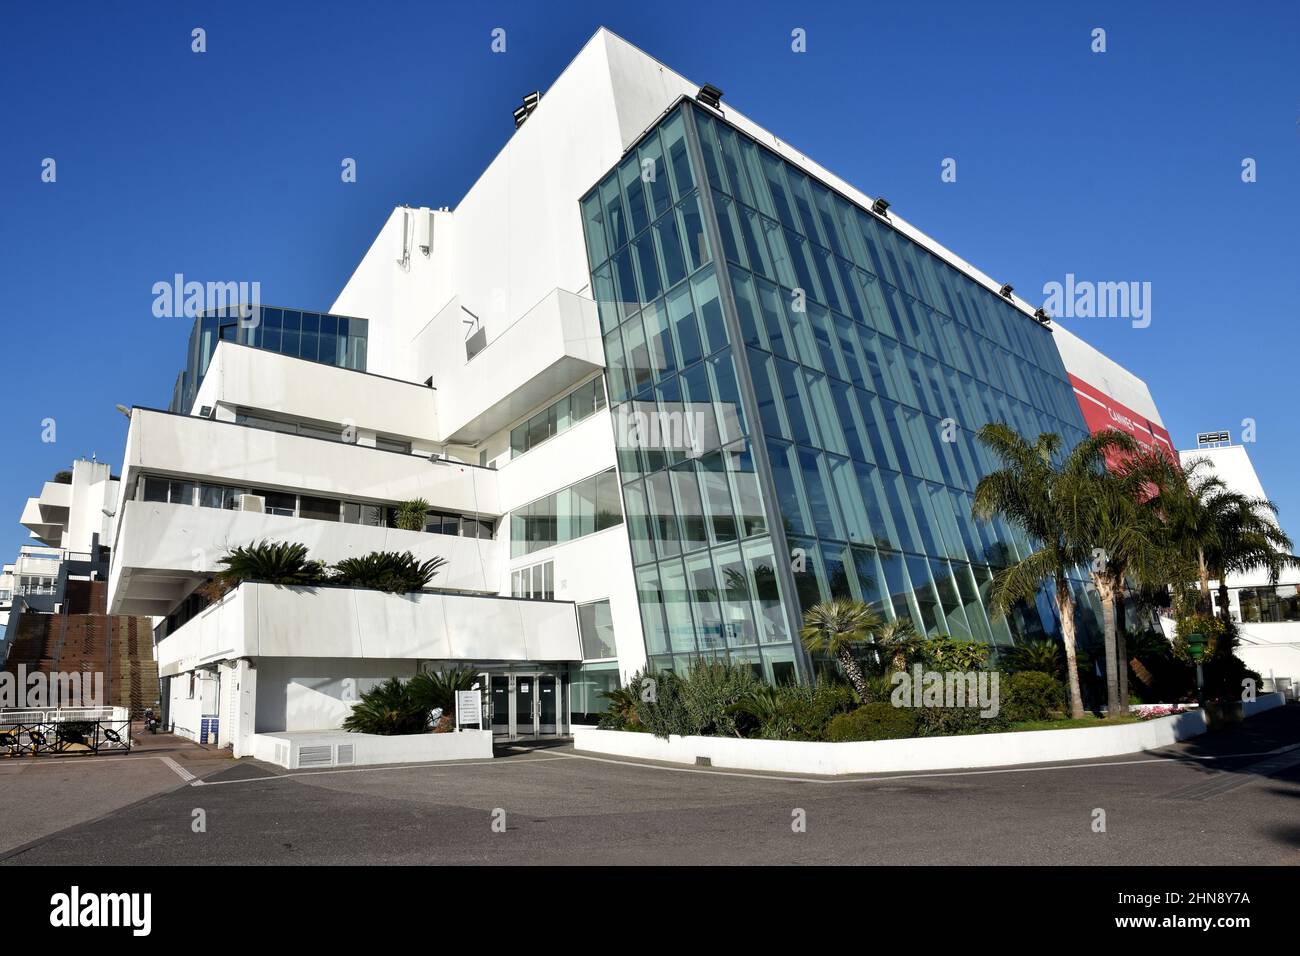 France, french riviera, Cannes, the Festival Palace where each year is organized the International Film Festival awarded by the Golden Palm. Stock Photo